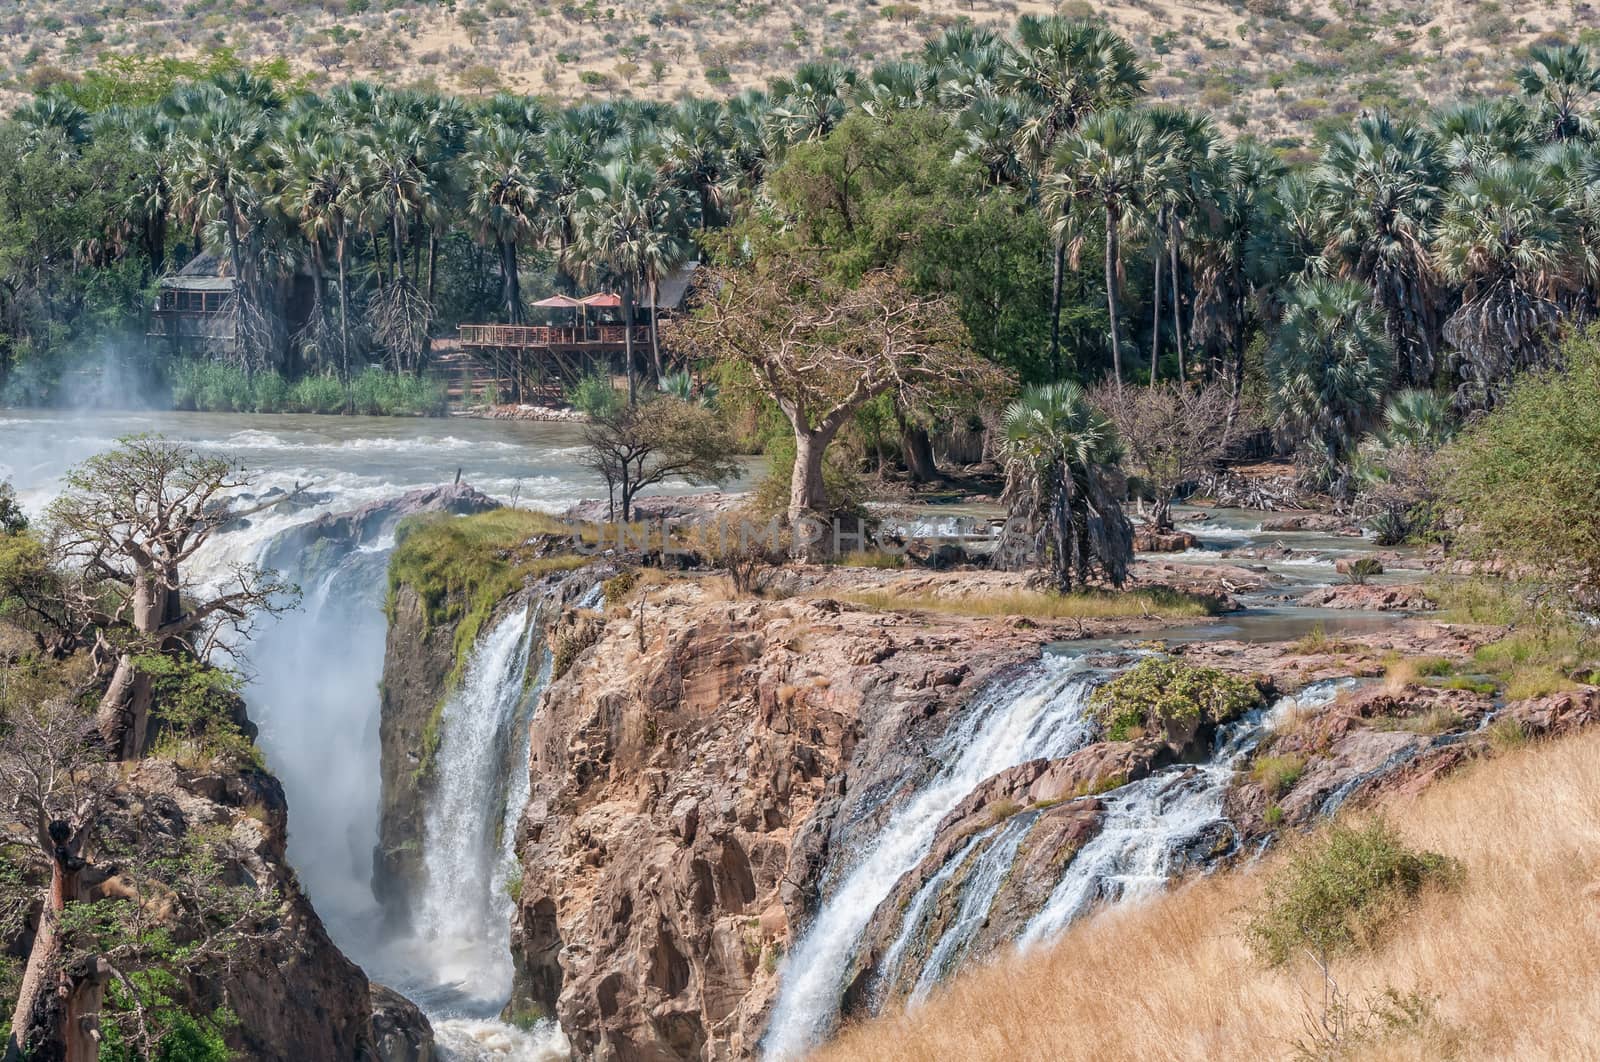 Part of the Epupa waterfalls in the Kunene River. Buildings, baobab and makalani palm trees are visible